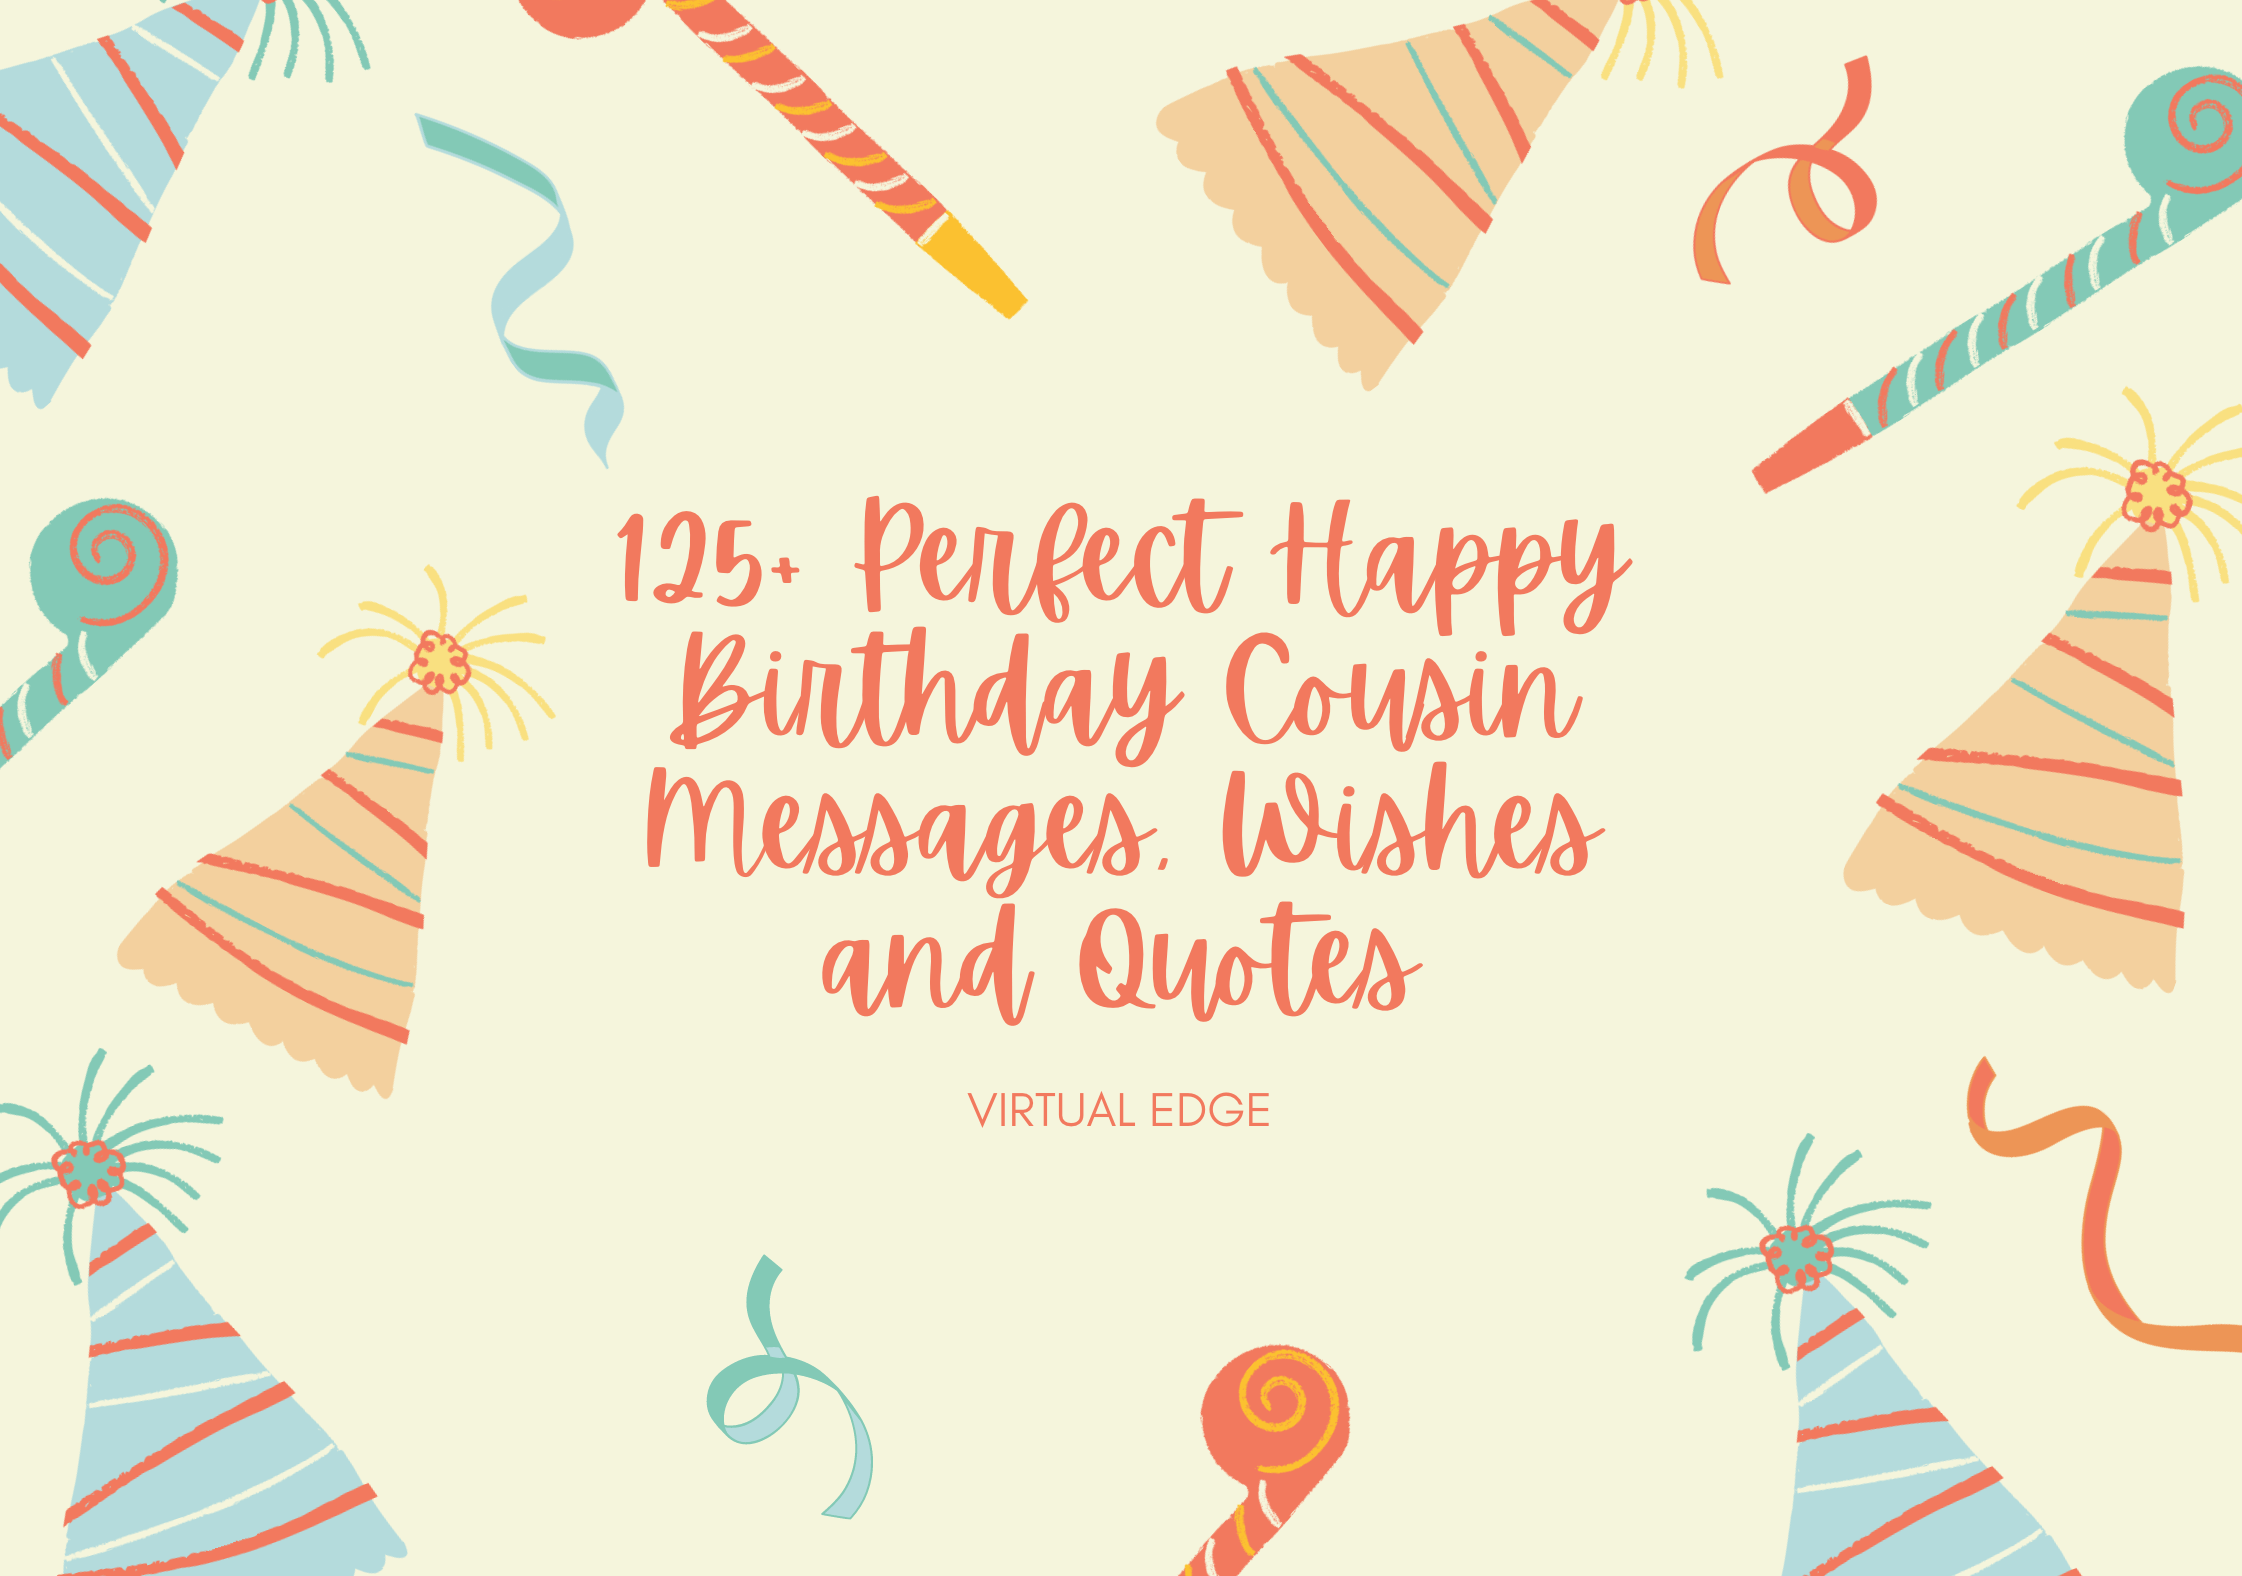 125+ Perfect Happy Birthday Cousin Messages, Wishes and Quotes